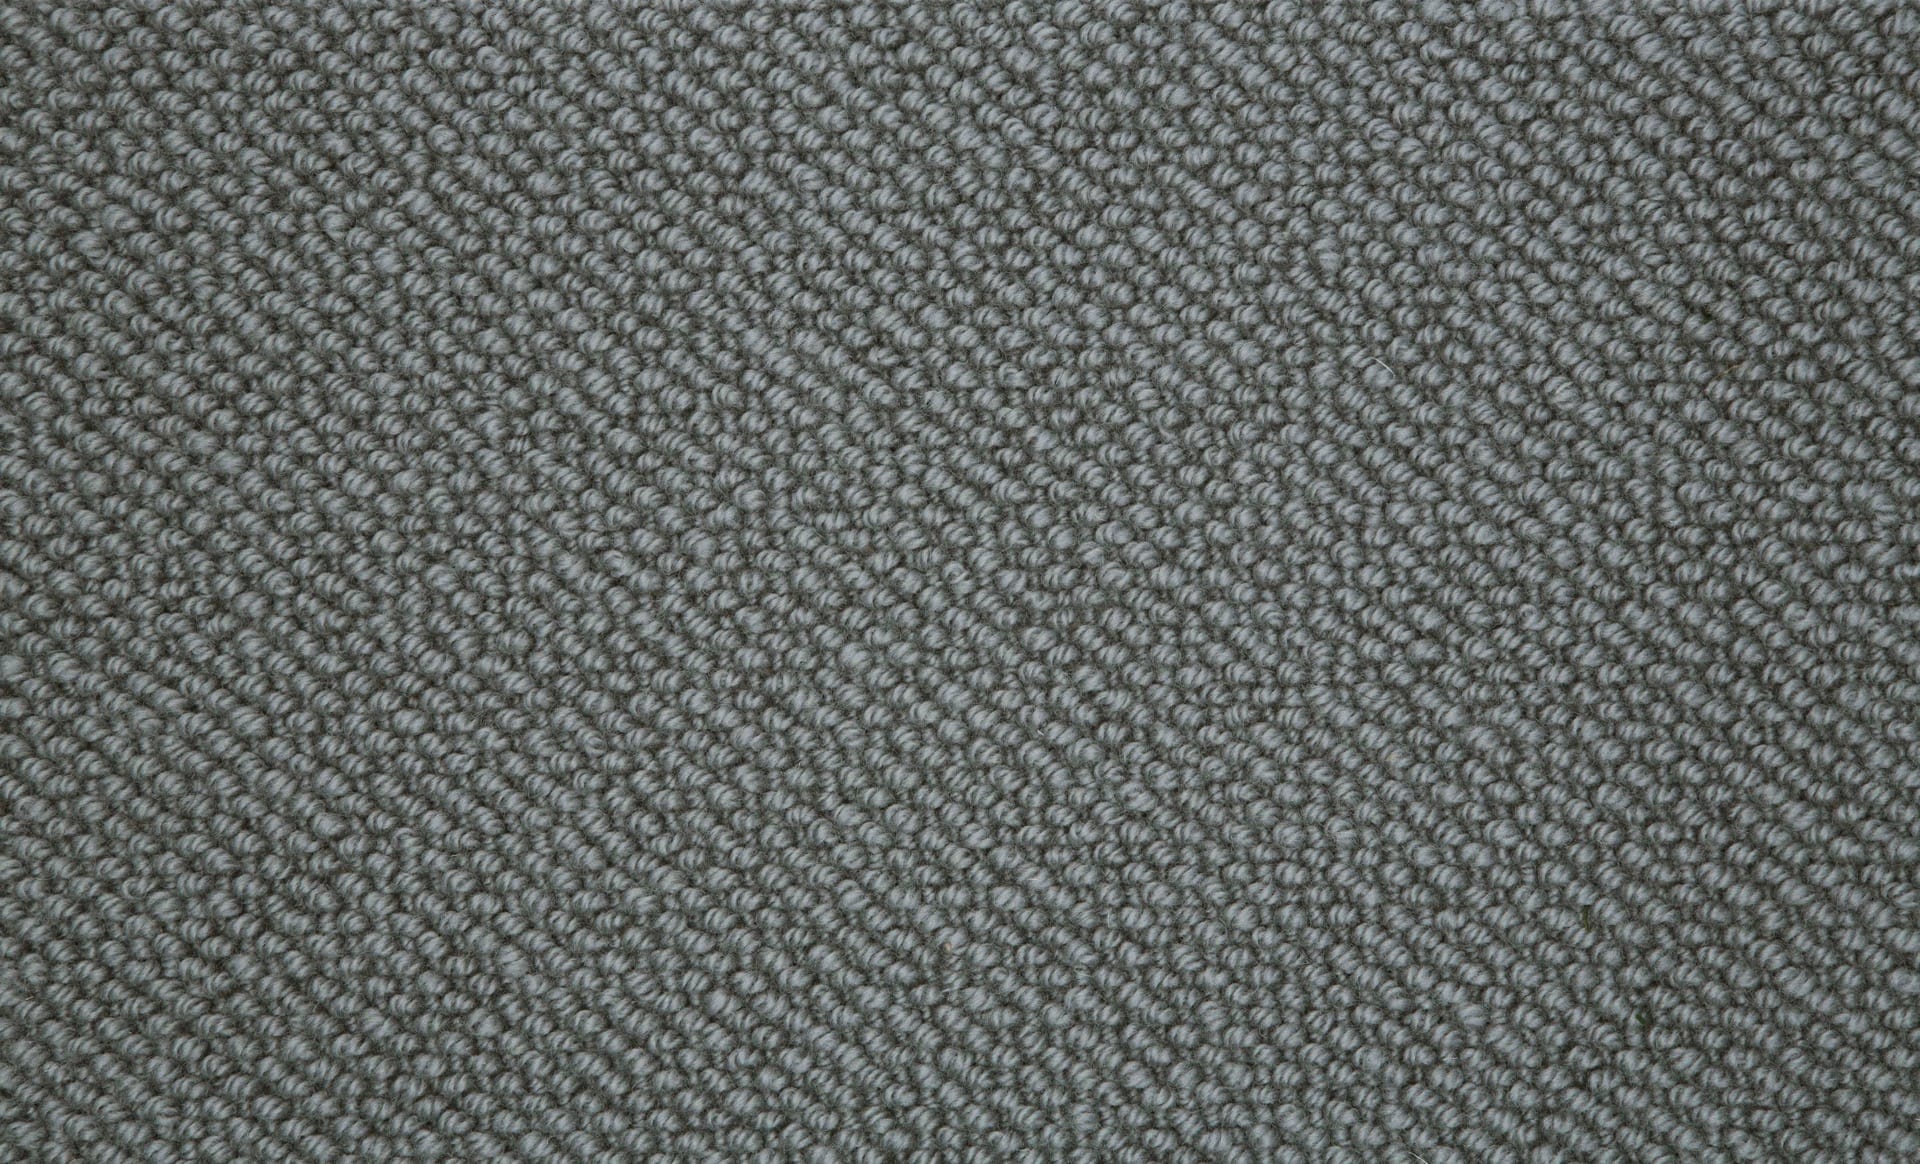 Wool Pearl Grey Dove WP106 carpet by Crucial Trading